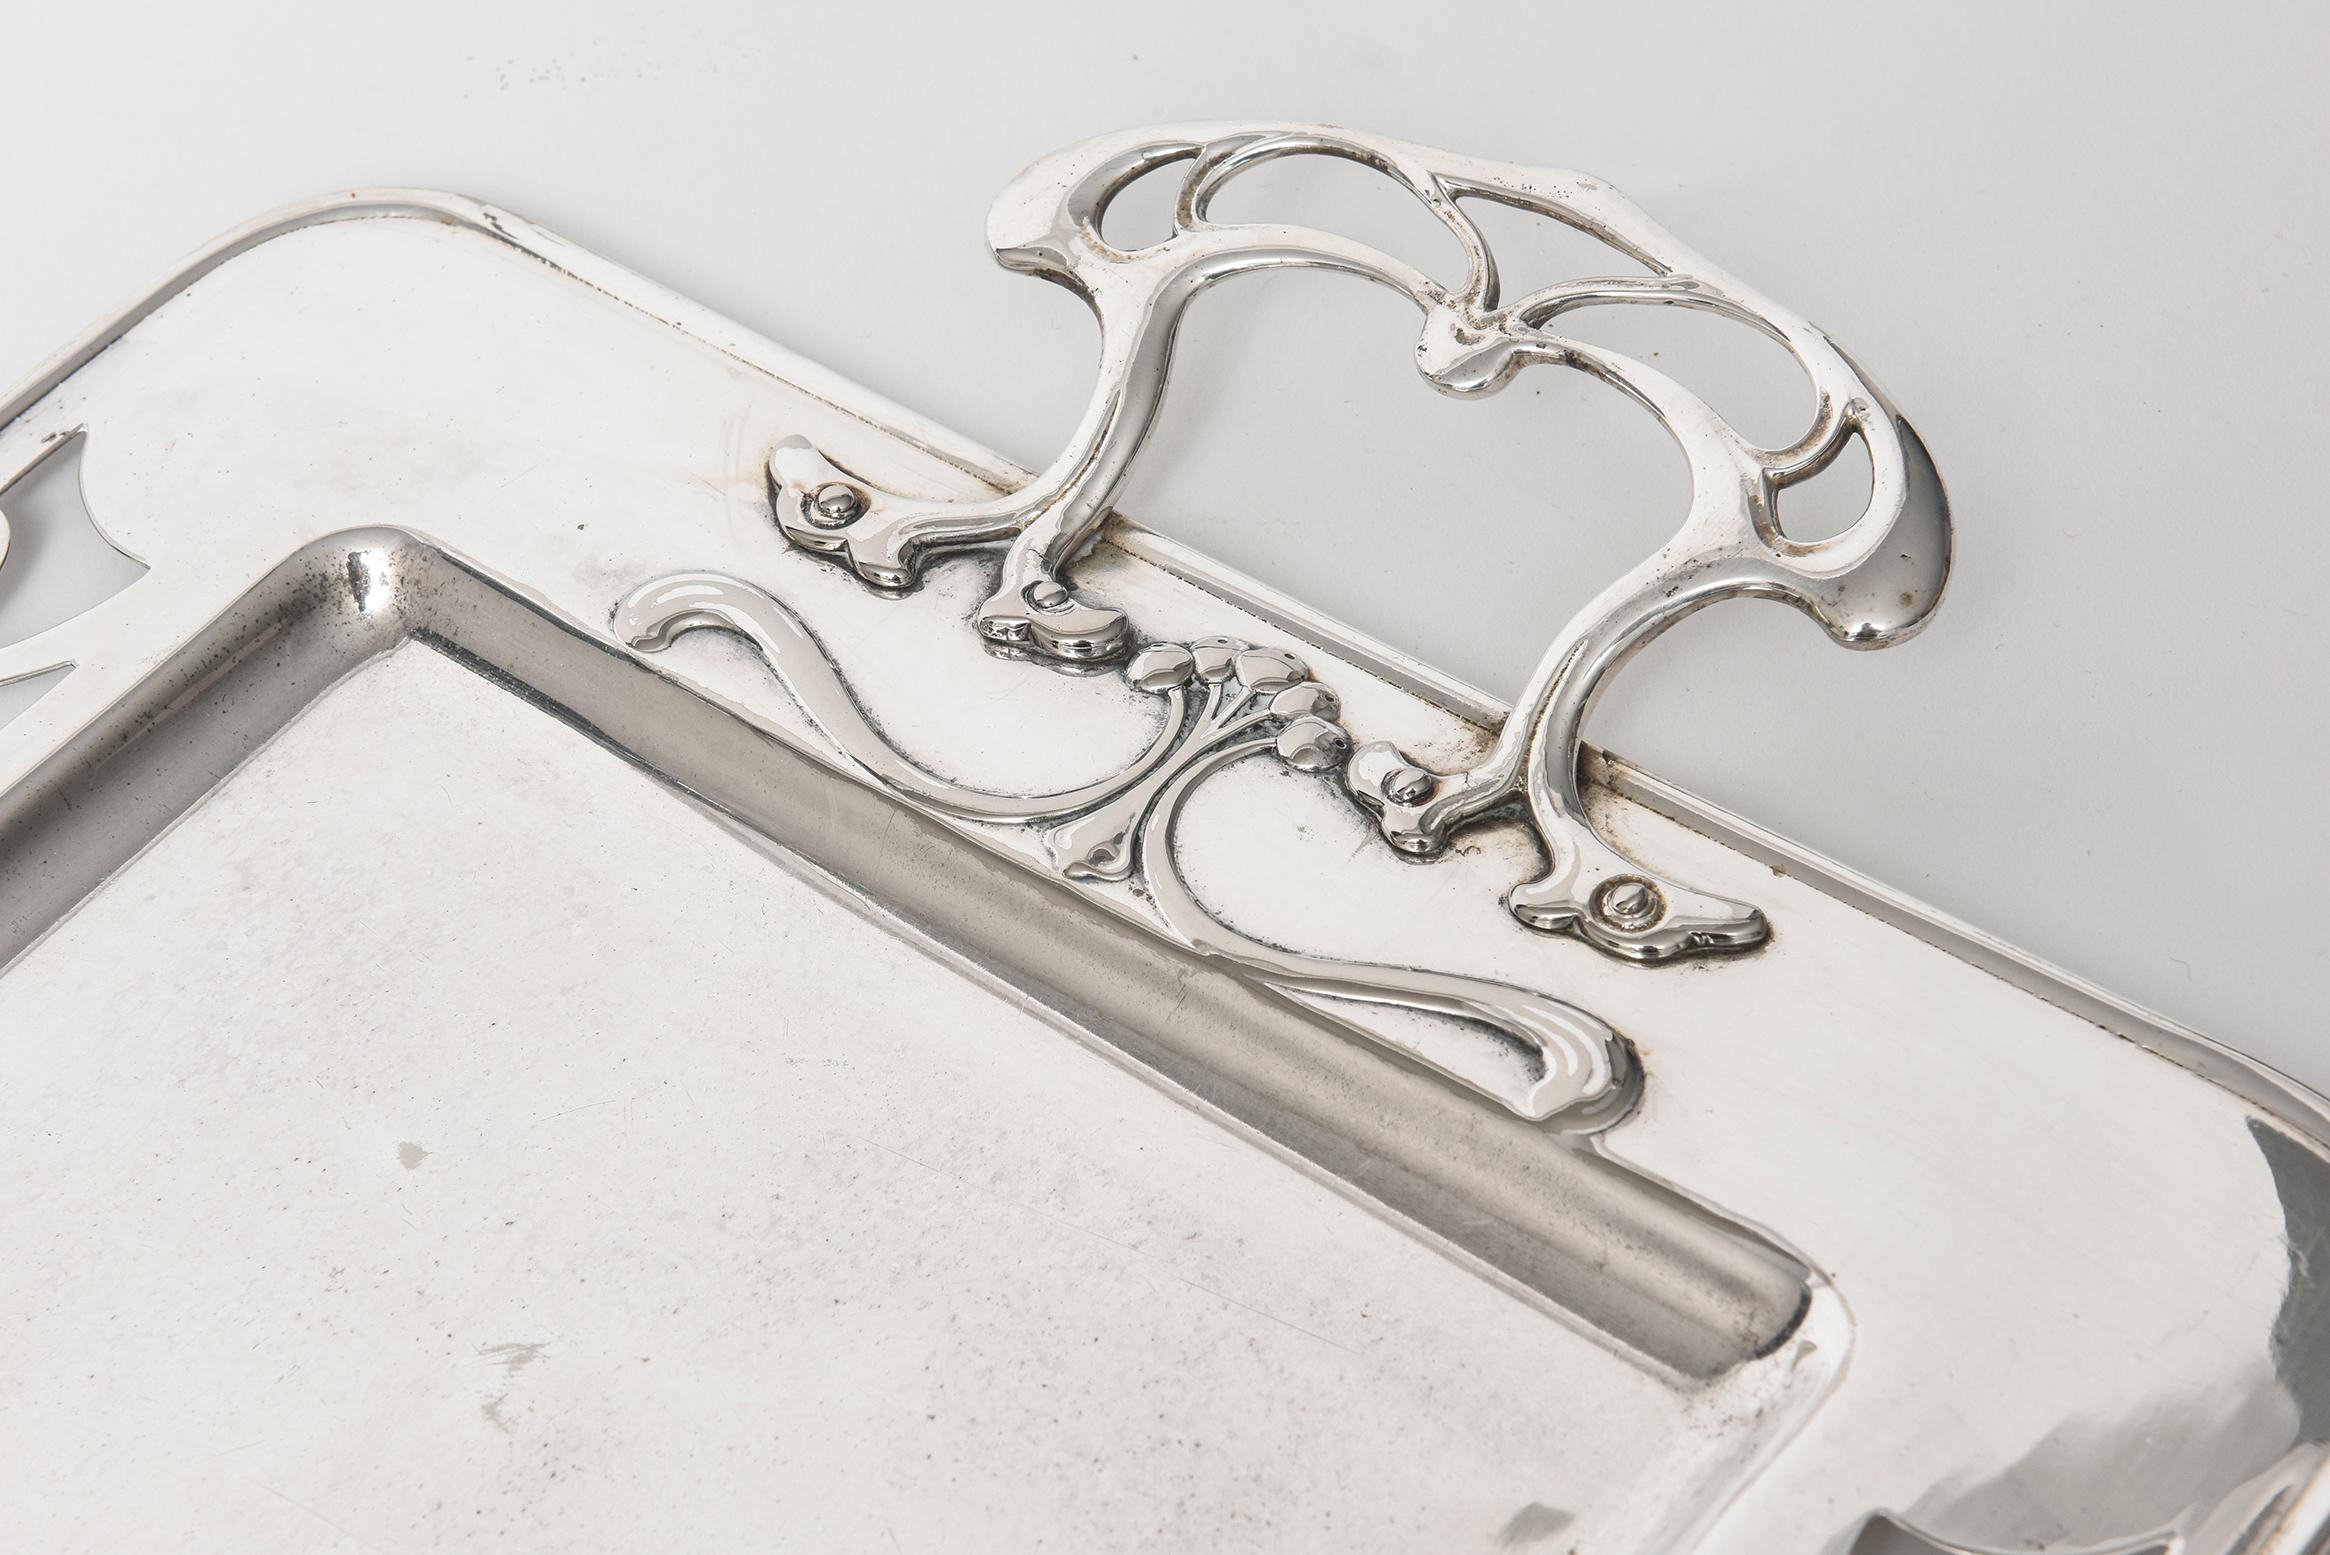 German WMF Art Nouveau Silver Plate Serving Tray with Handles